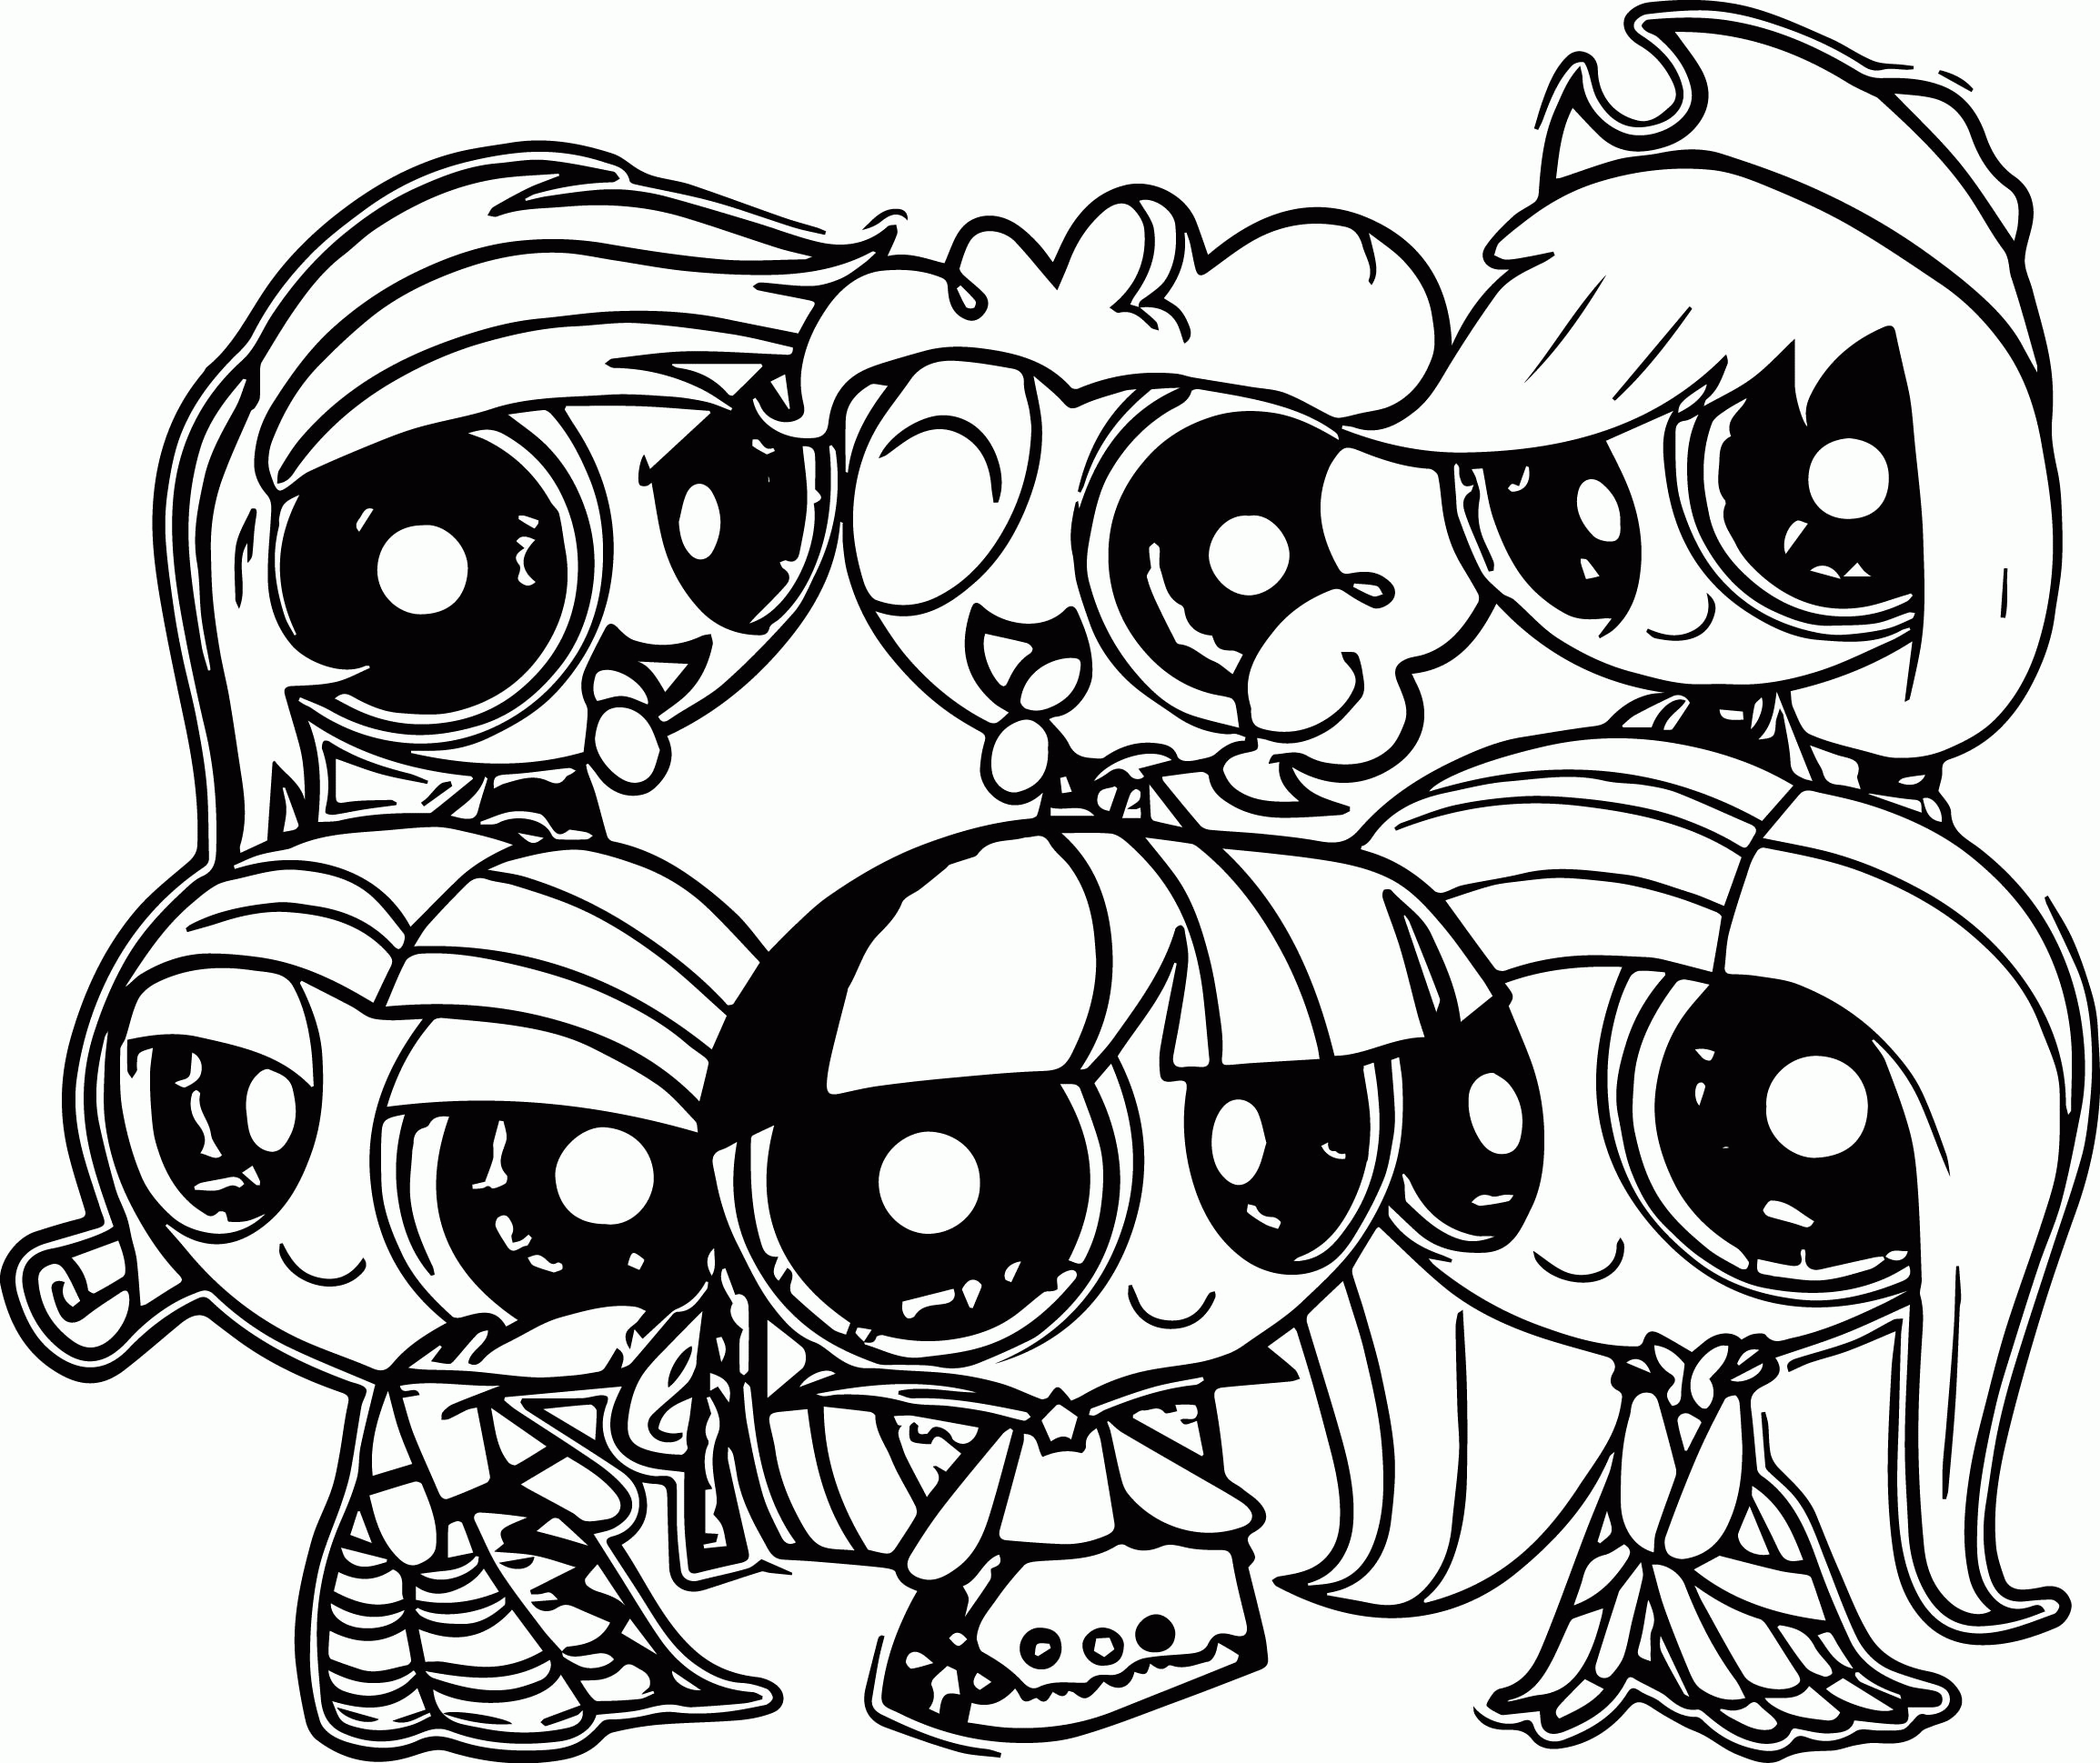 My Little Pony Coloring Pages With All Ponies - Coloring Home